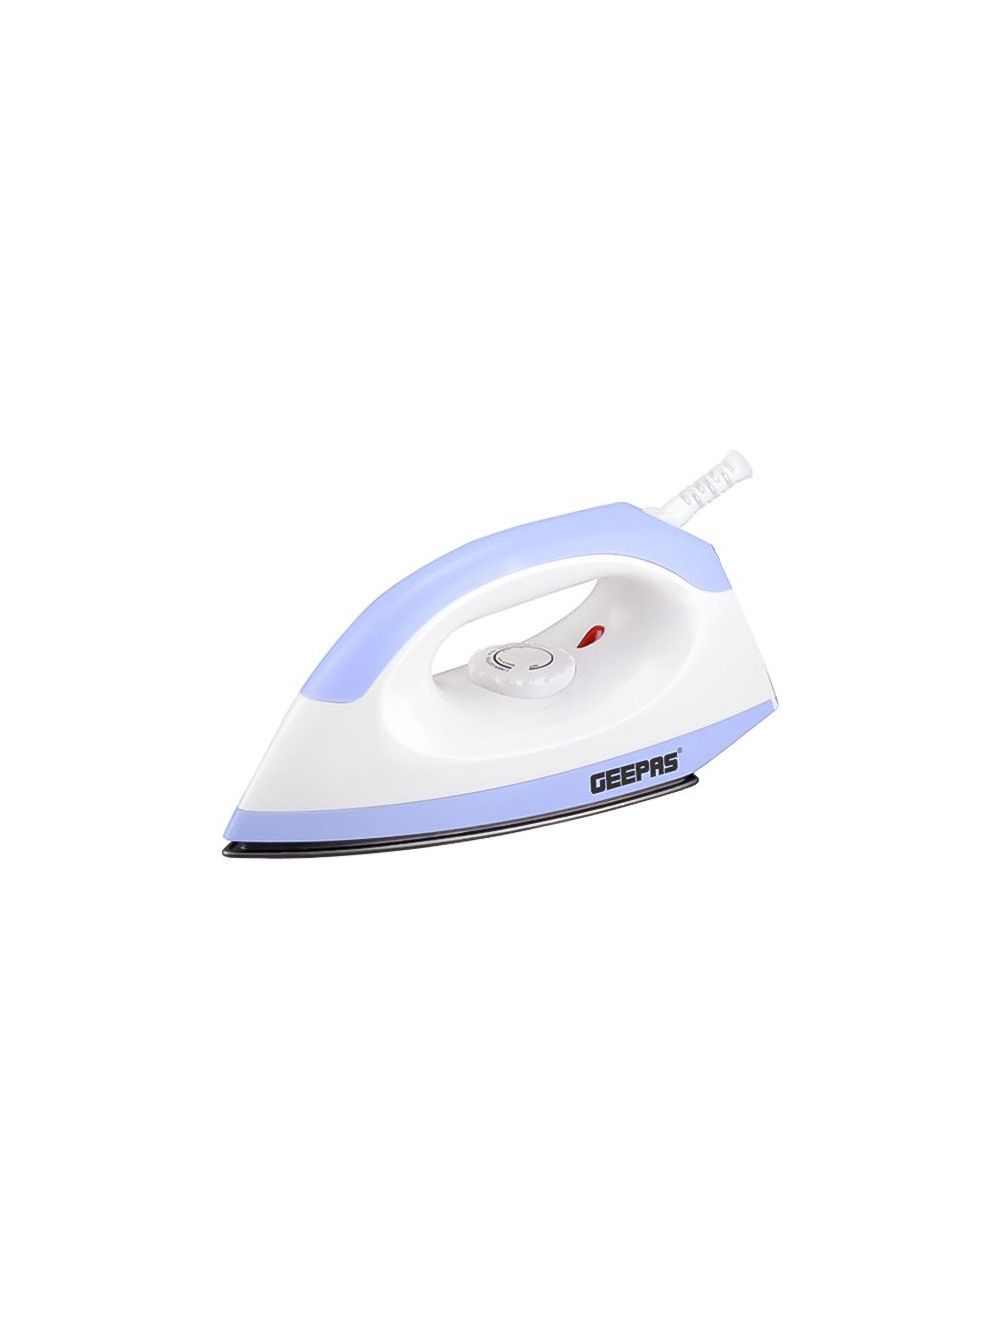 Geepas GDI7795 1200 Watts Dry Iron with Non-Stick Coating Soleplate